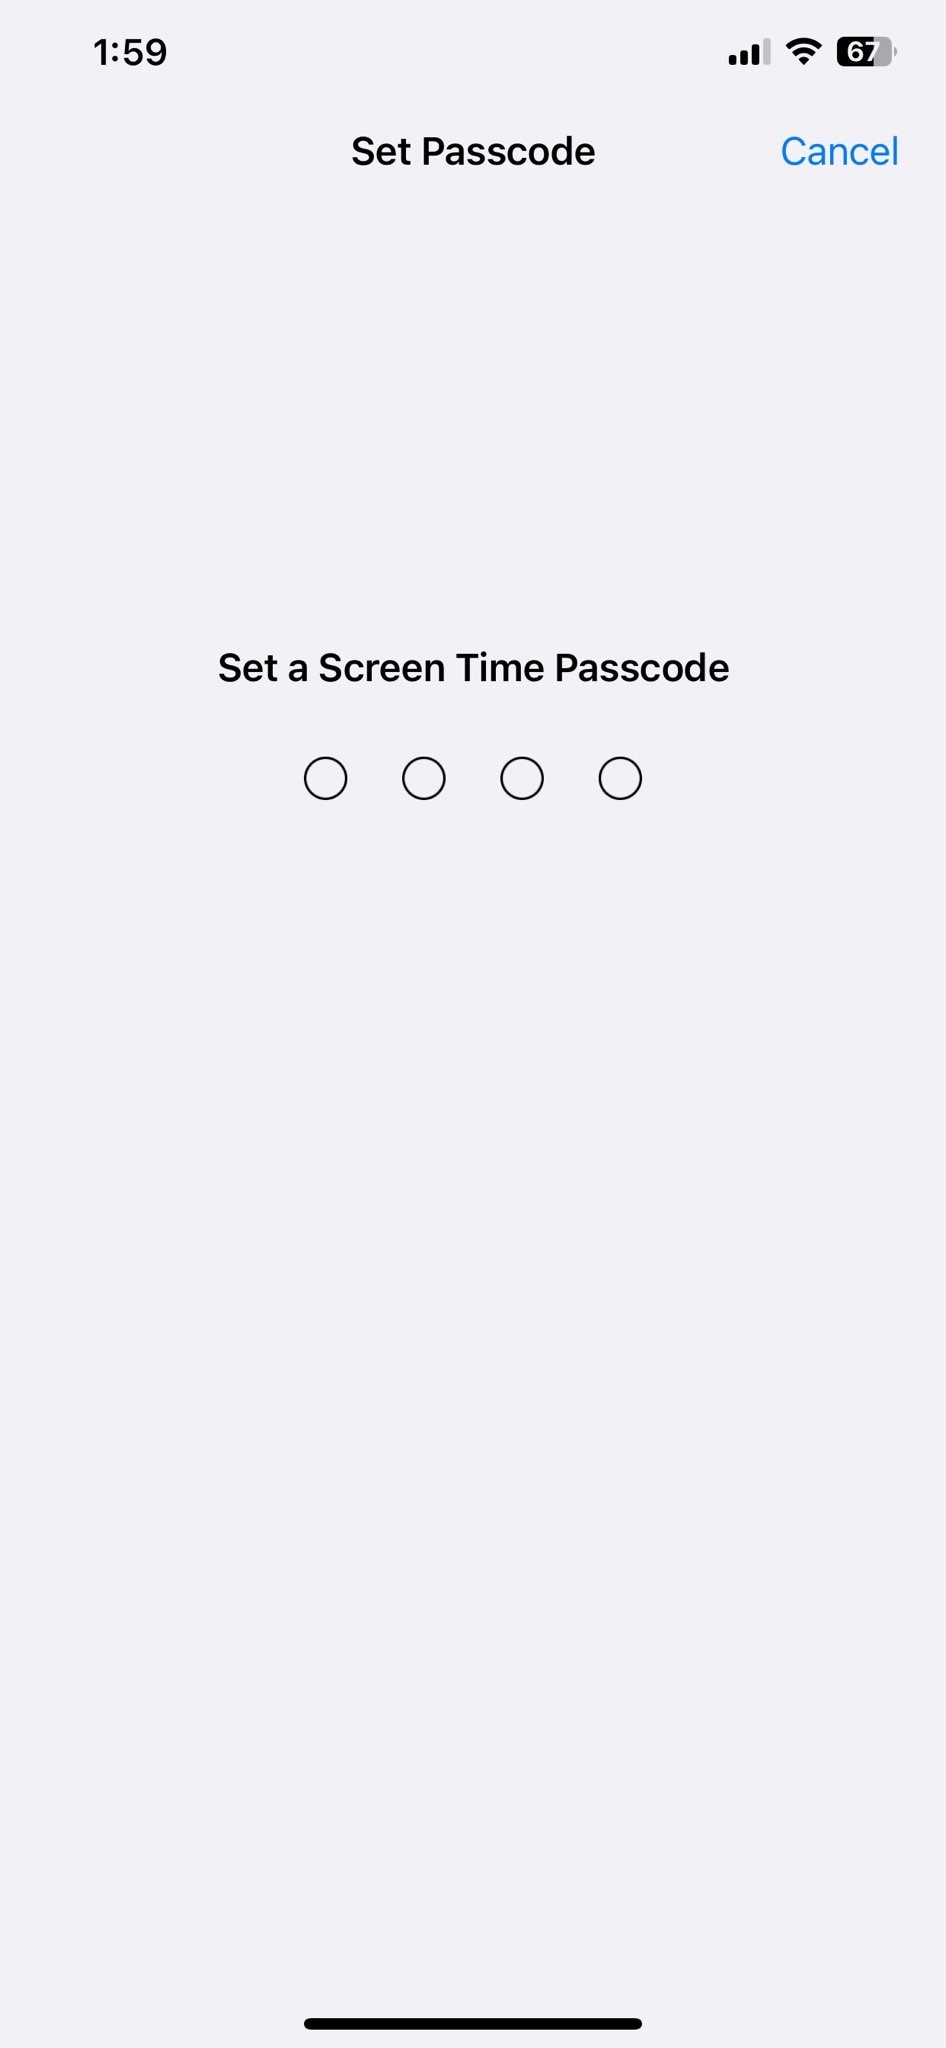 Next, tap 'Use Screen Time Passcode' 